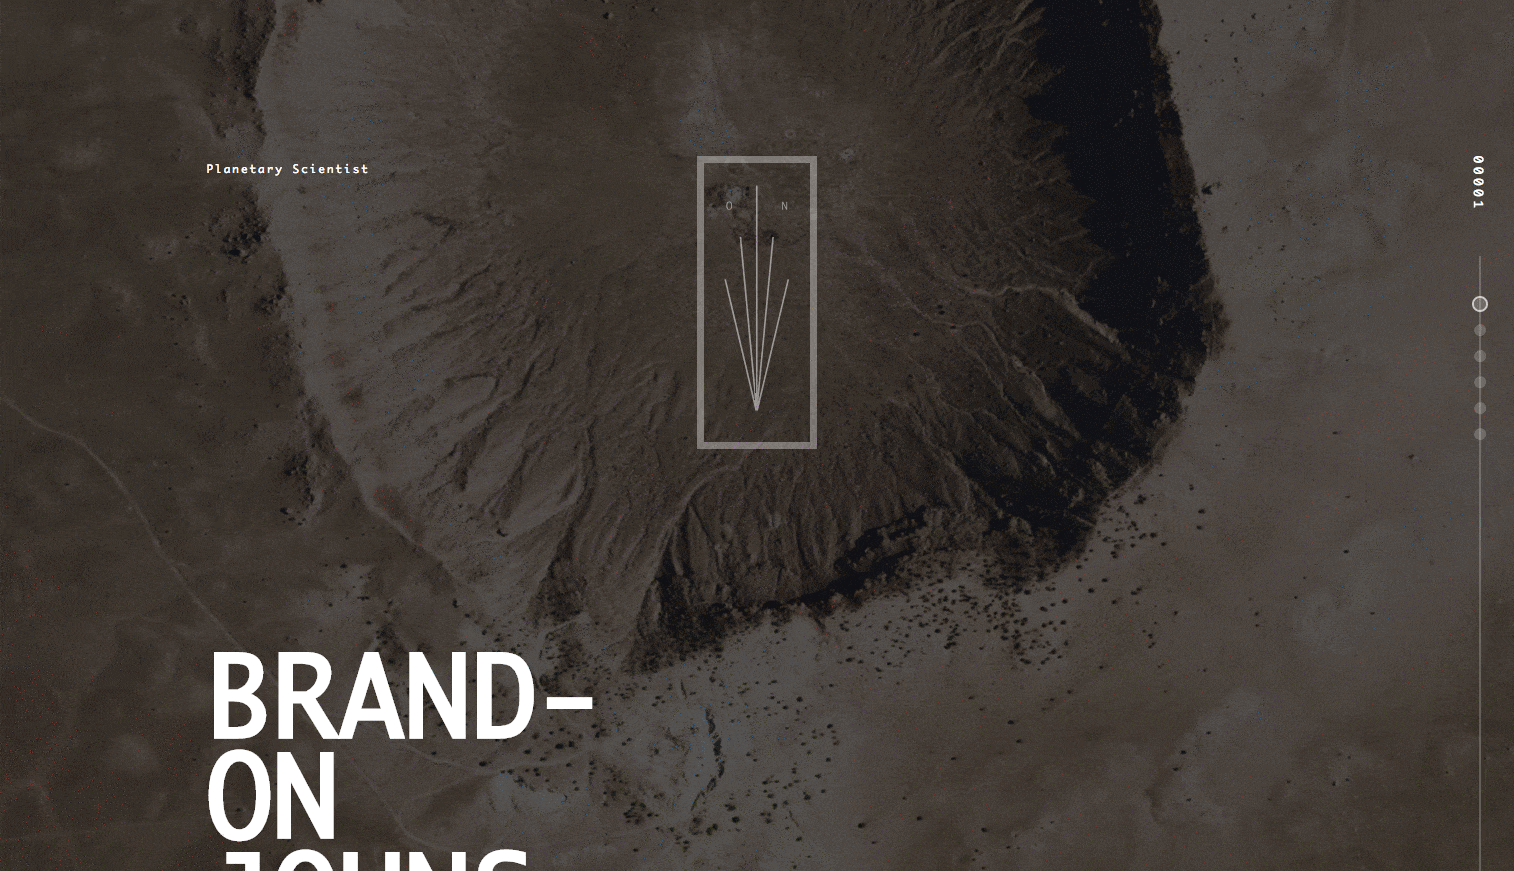 Personal website of Brandon Johnson with black and white resume and space theme